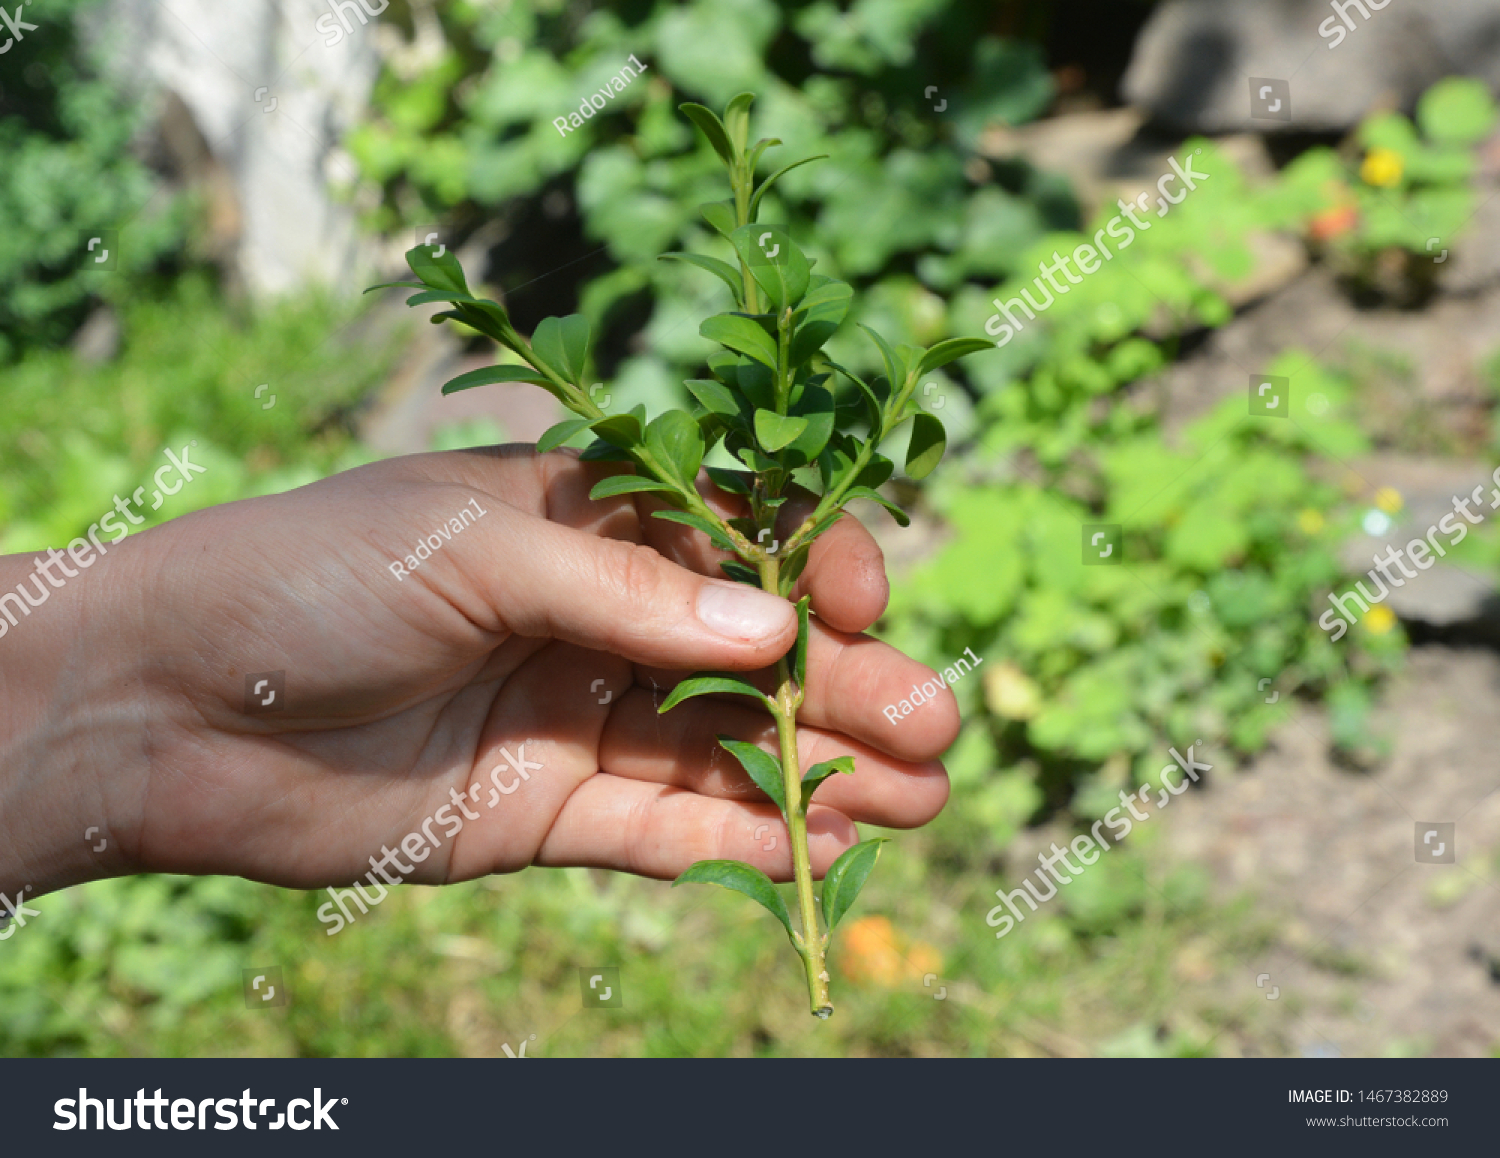 Boxwood Propagation with Stem Cuttings. Growing Boxwood Hedge Shrubs By Rooting Cuttings #1467382889